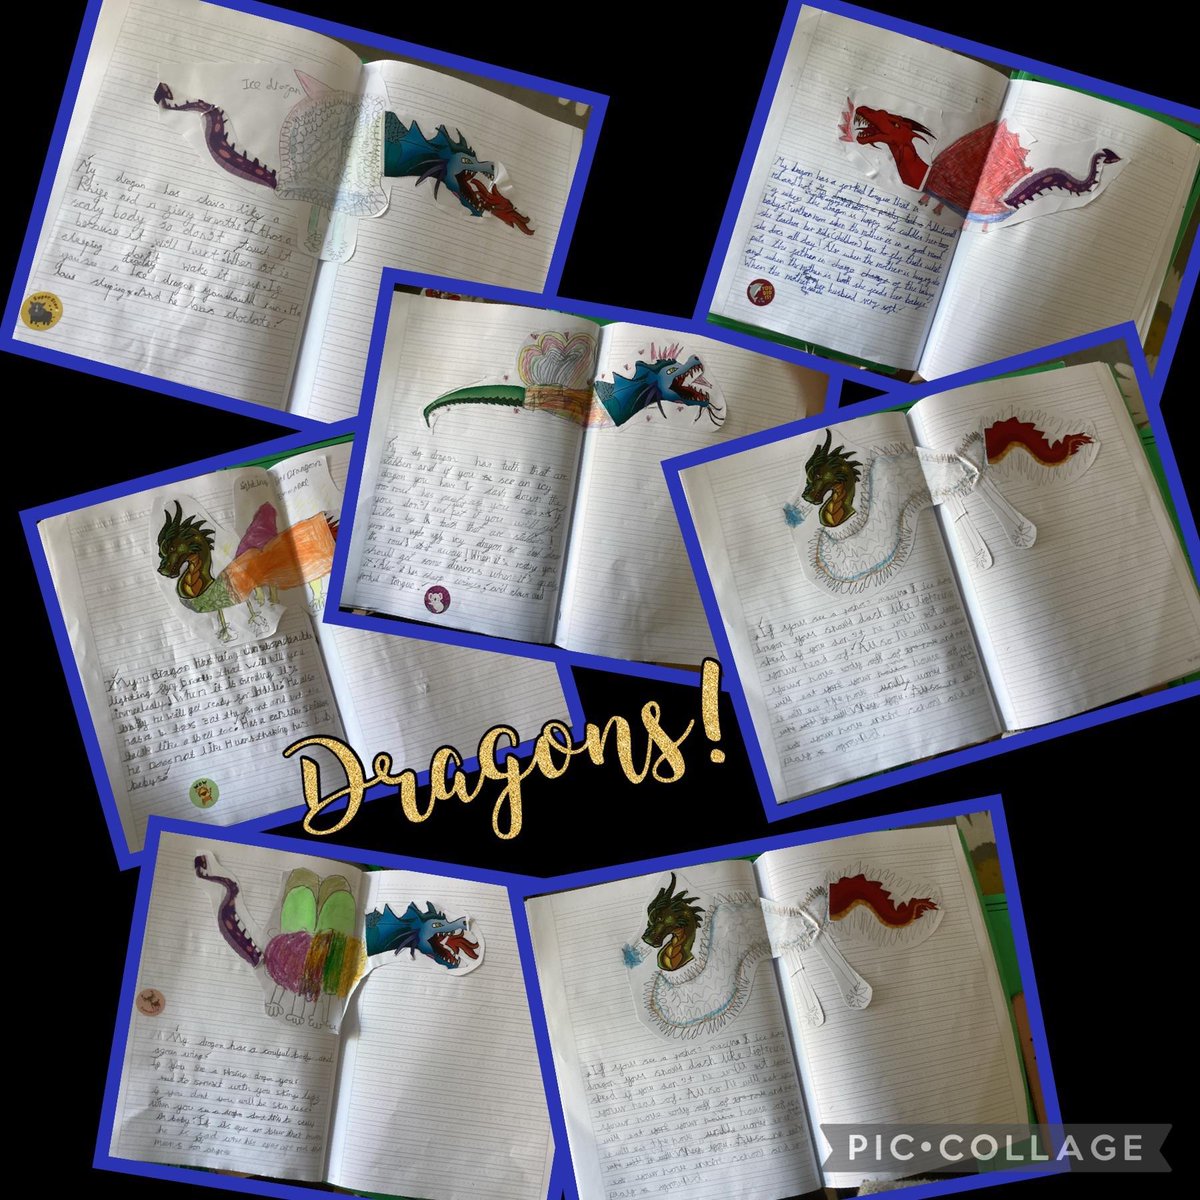 Year 2 have been creating their own dragons and writing about them. 
We love their new creations! 
@lsenglishhub @YoungWritersCW @PrimaryEnglish #writing #primarycurriculum